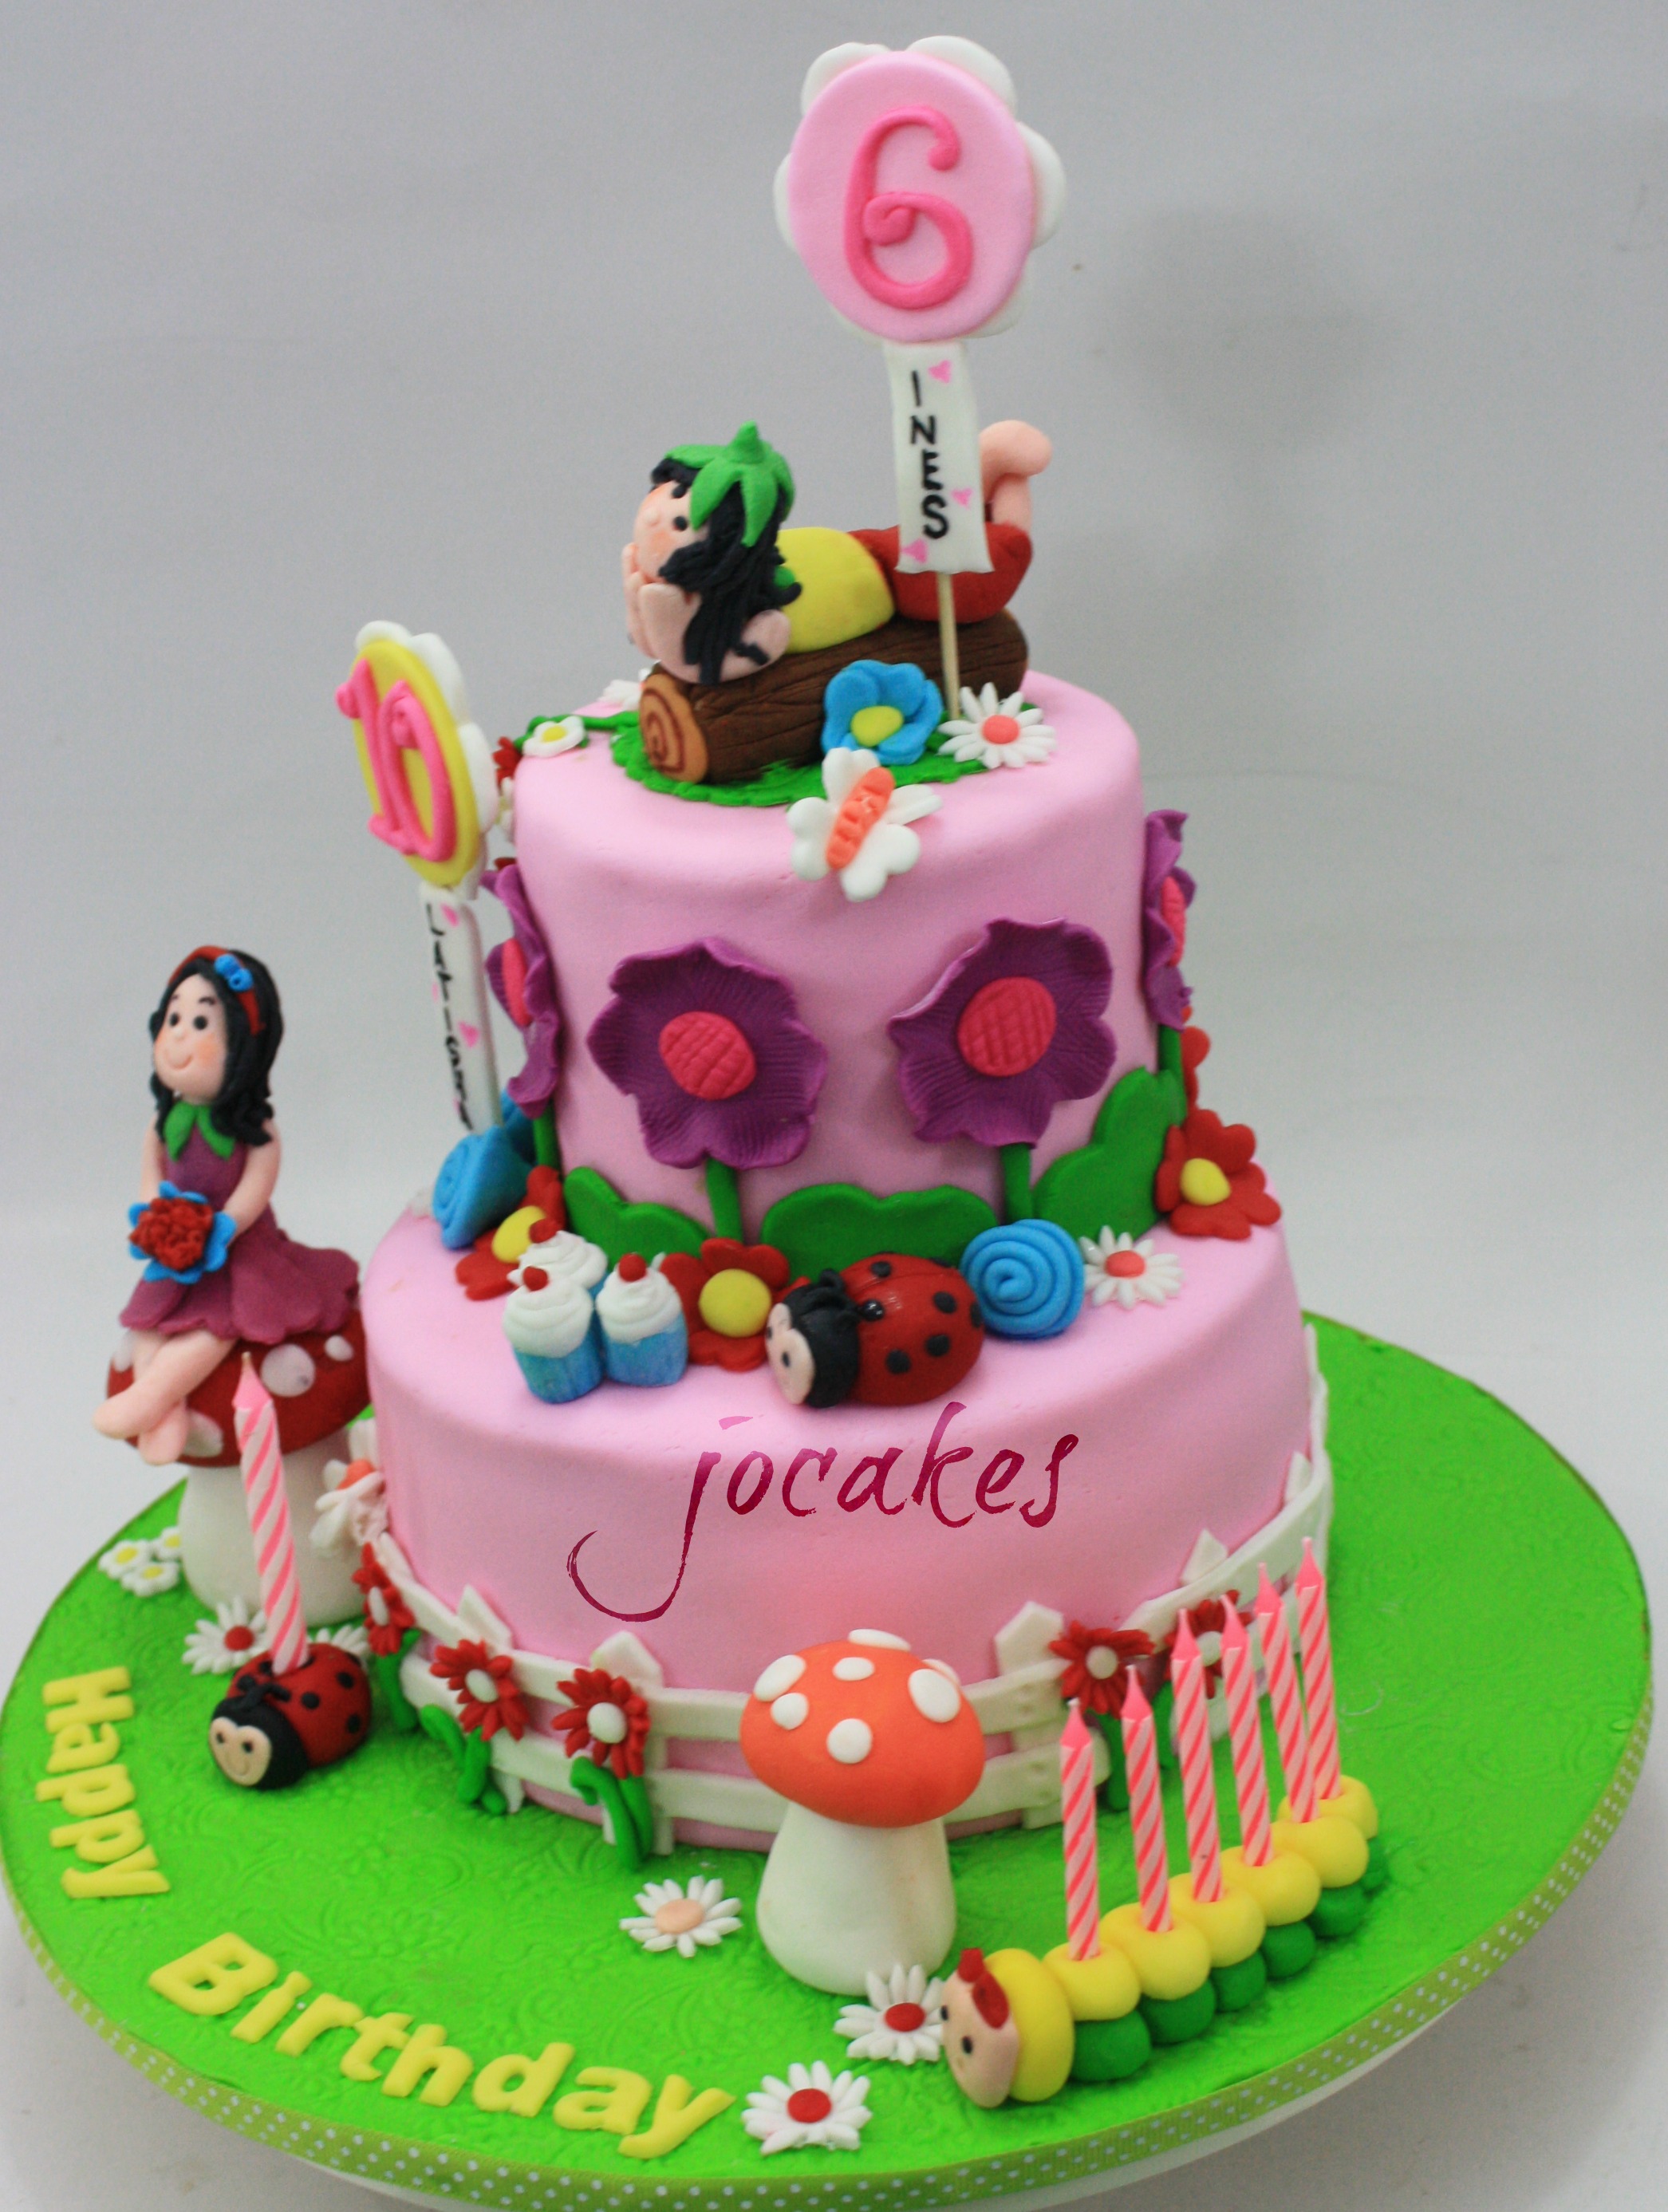 Butterfly girl cake for 6 year old Ines. | jocakes